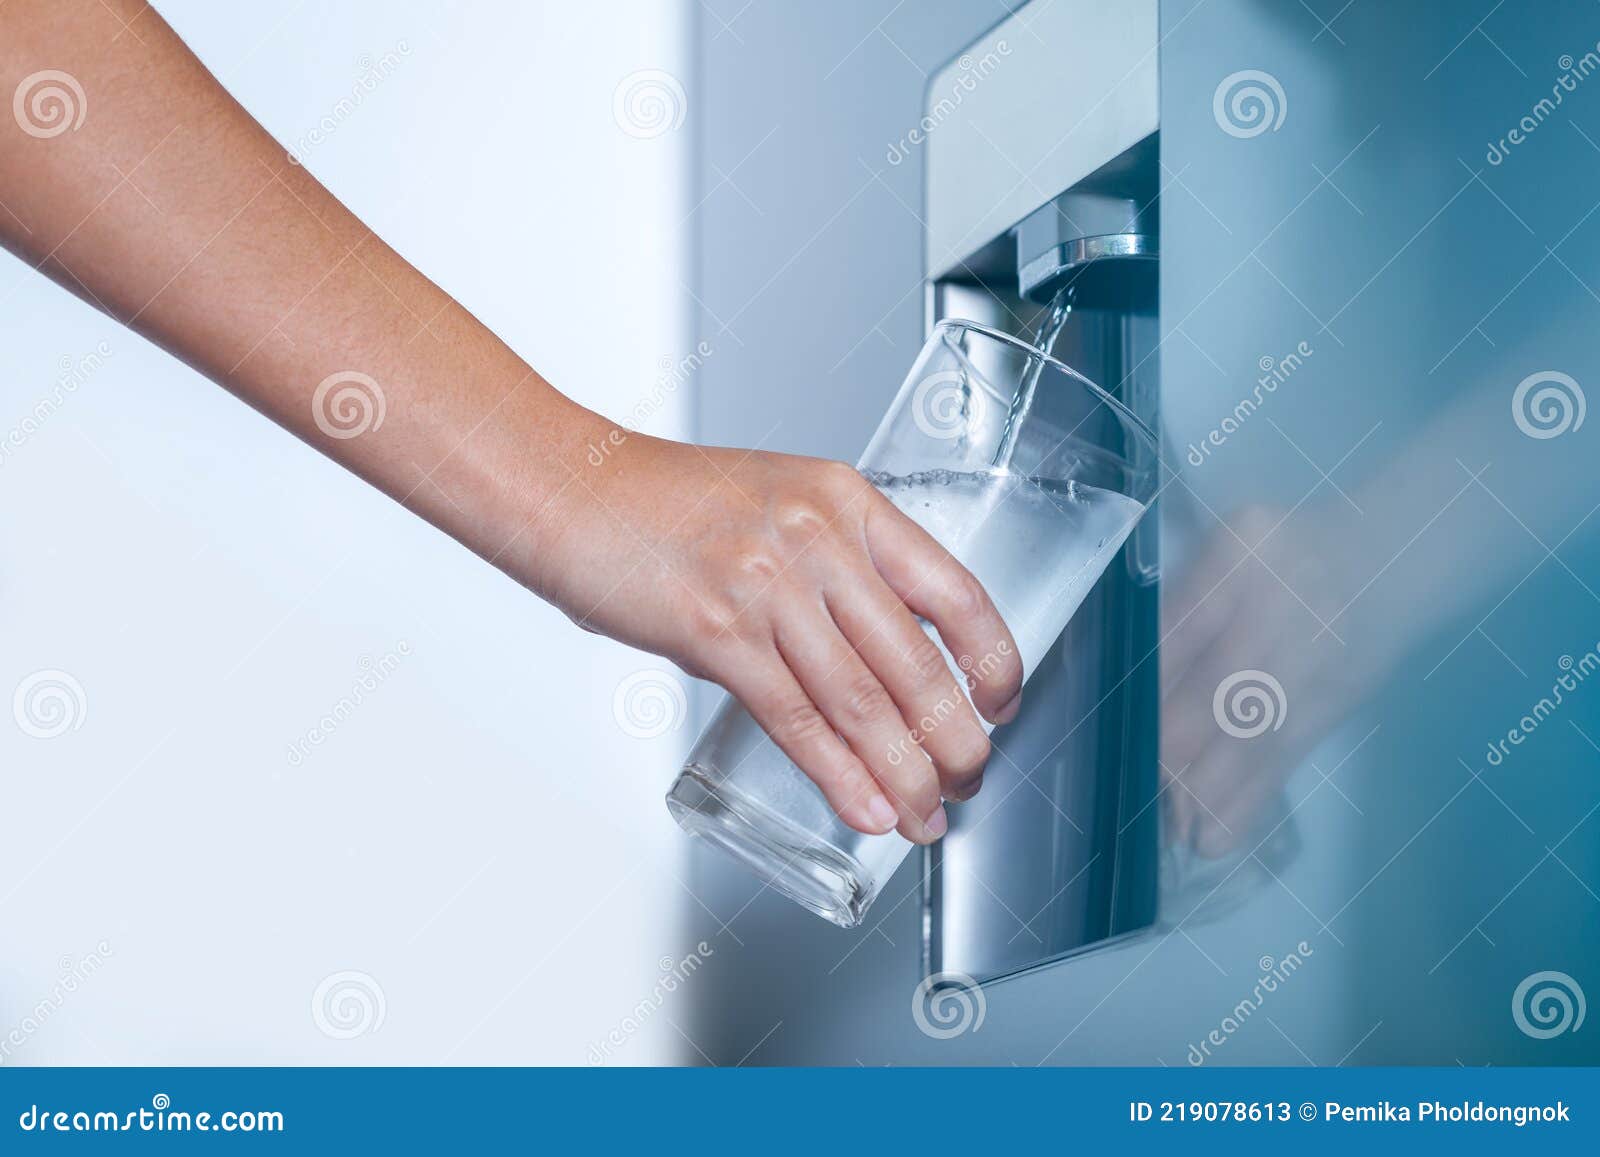 Water Dispenser from Dispenser of Home Fridge, Woman is Filling a